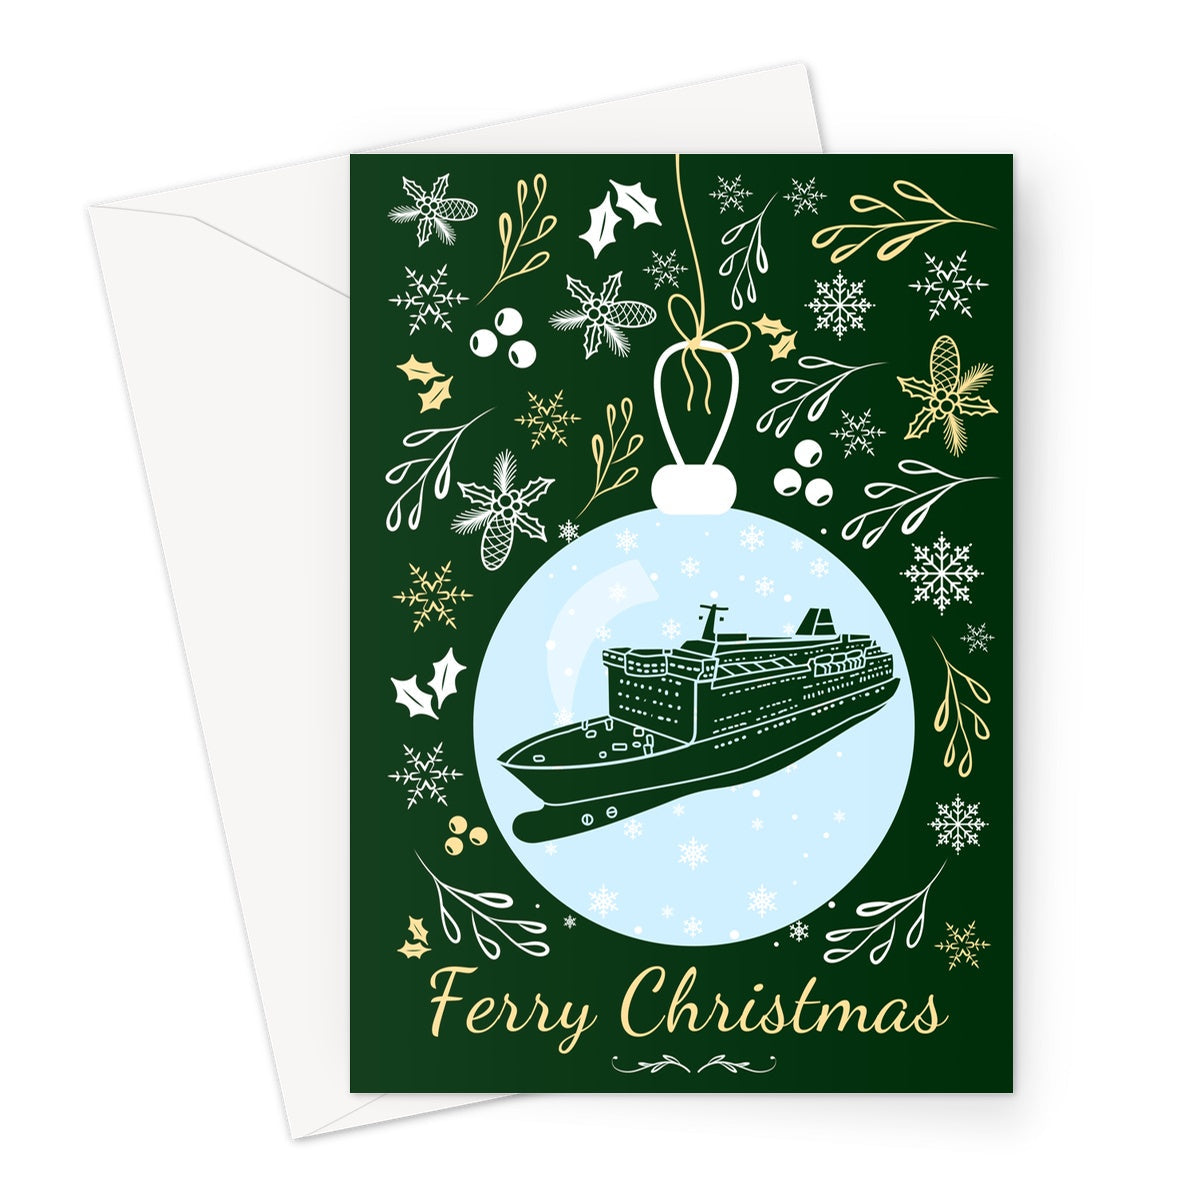 Nautical Christmas card (Ferry Christmas) Great Harbour Gifts